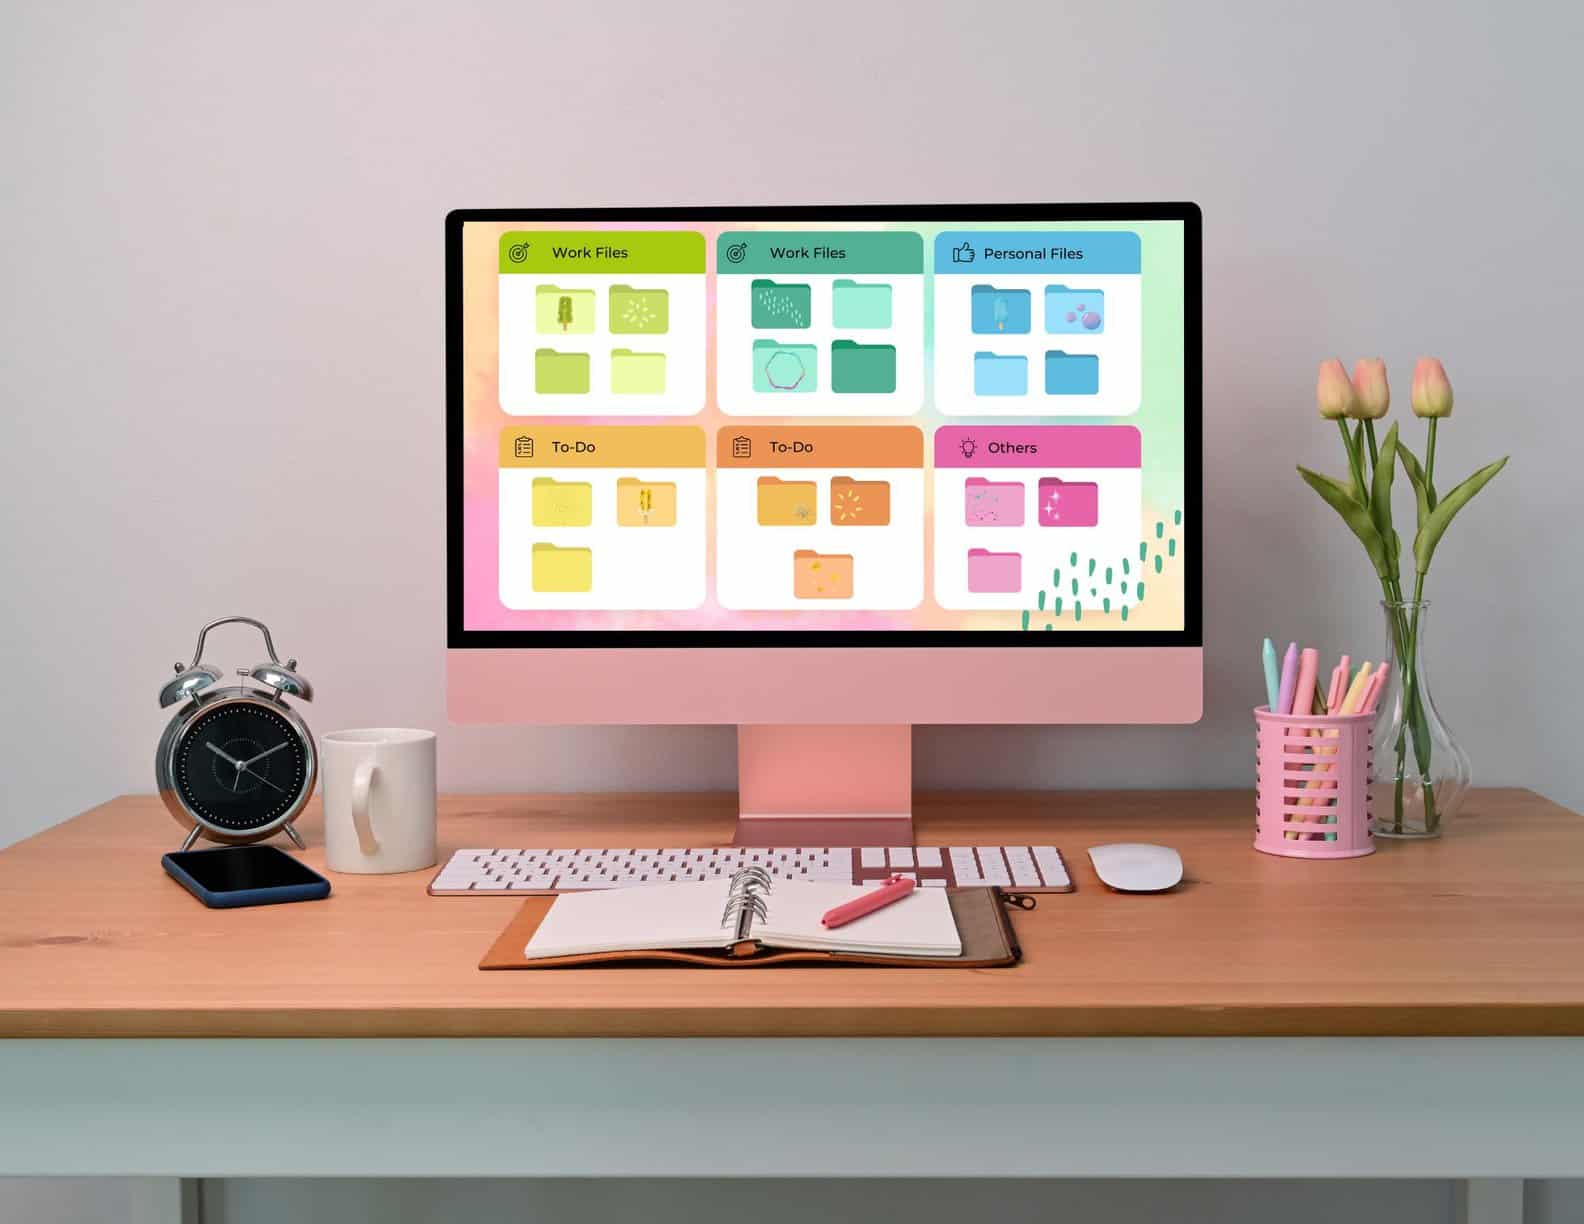 Top Tips for Letting Go of Clutter for a Neat Organized Desktop